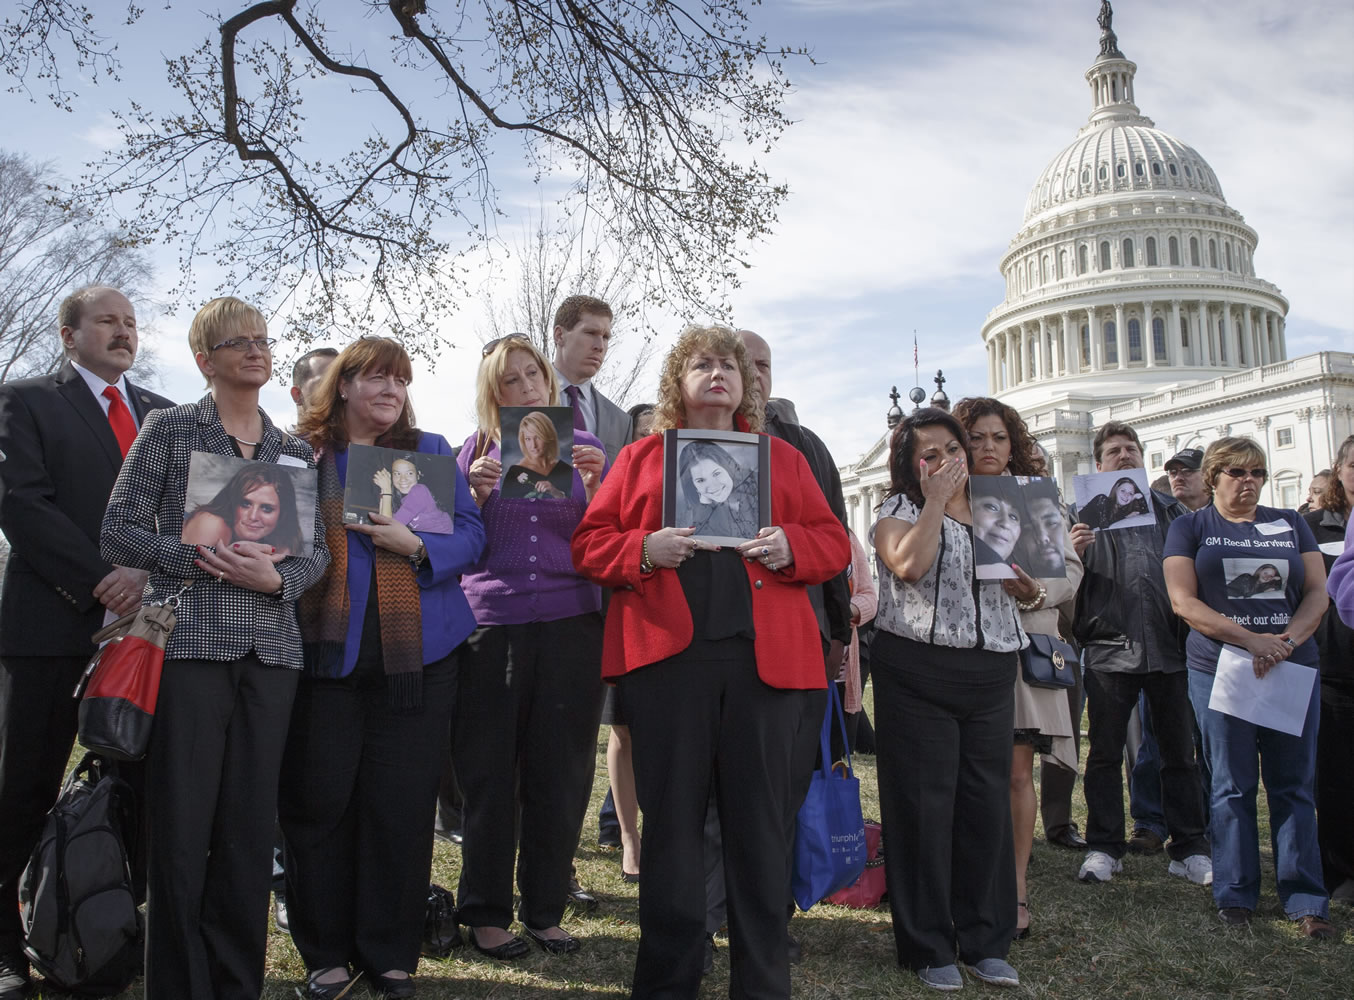 Families of victims of General Motors safety defects in small cars hold photos of loved ones as they gather at Capitol Hill in Washington.